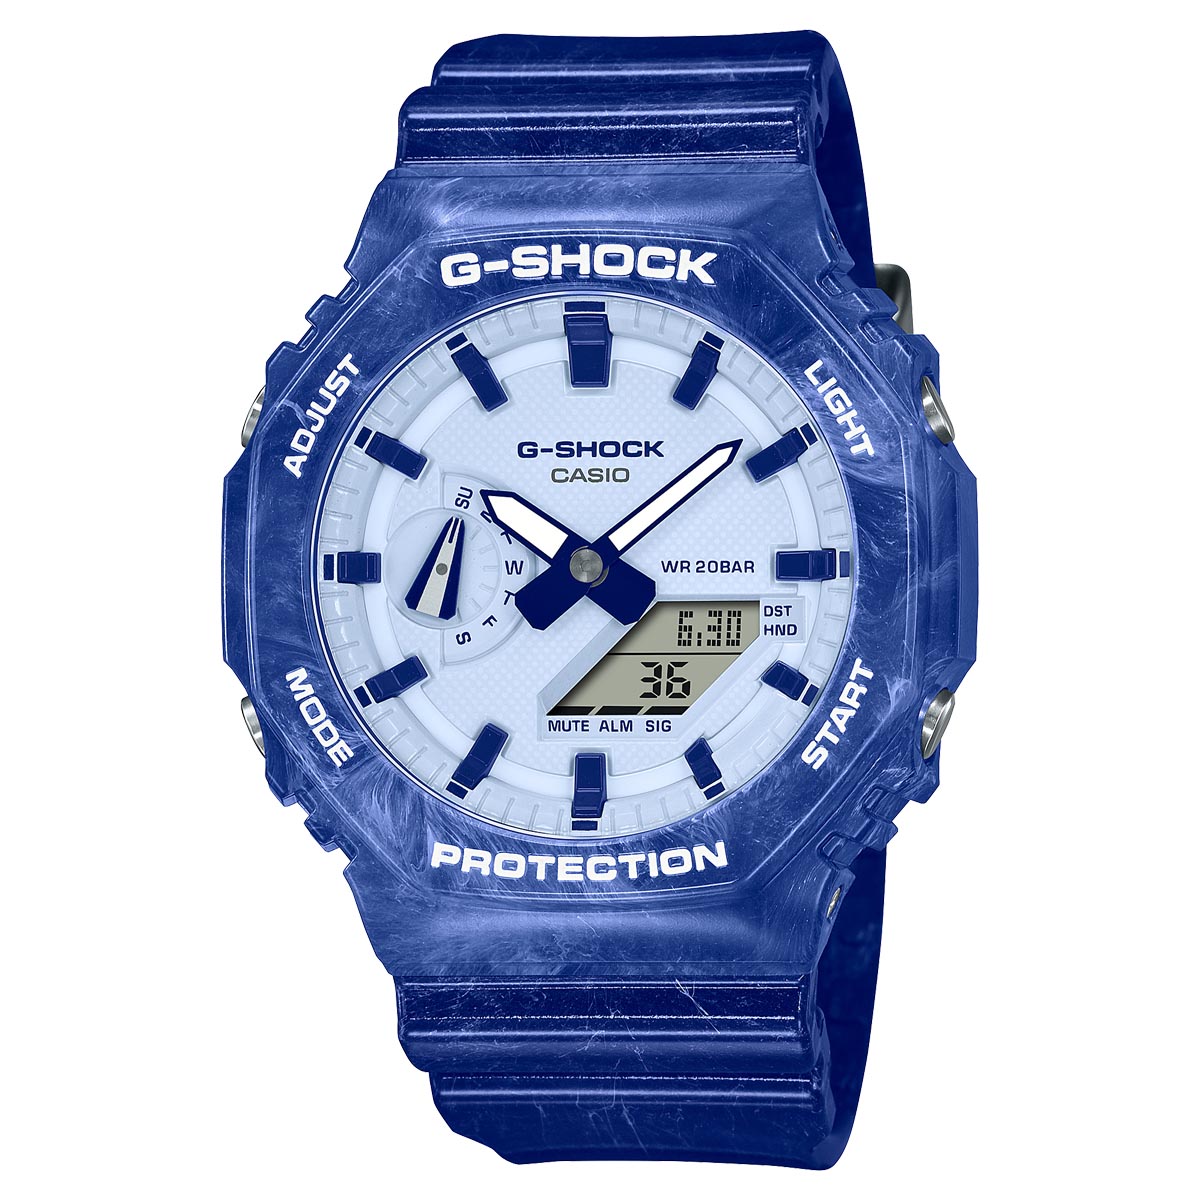 Gshock Mens Watch with White Dial and Blue Resin Band (quartz movement)